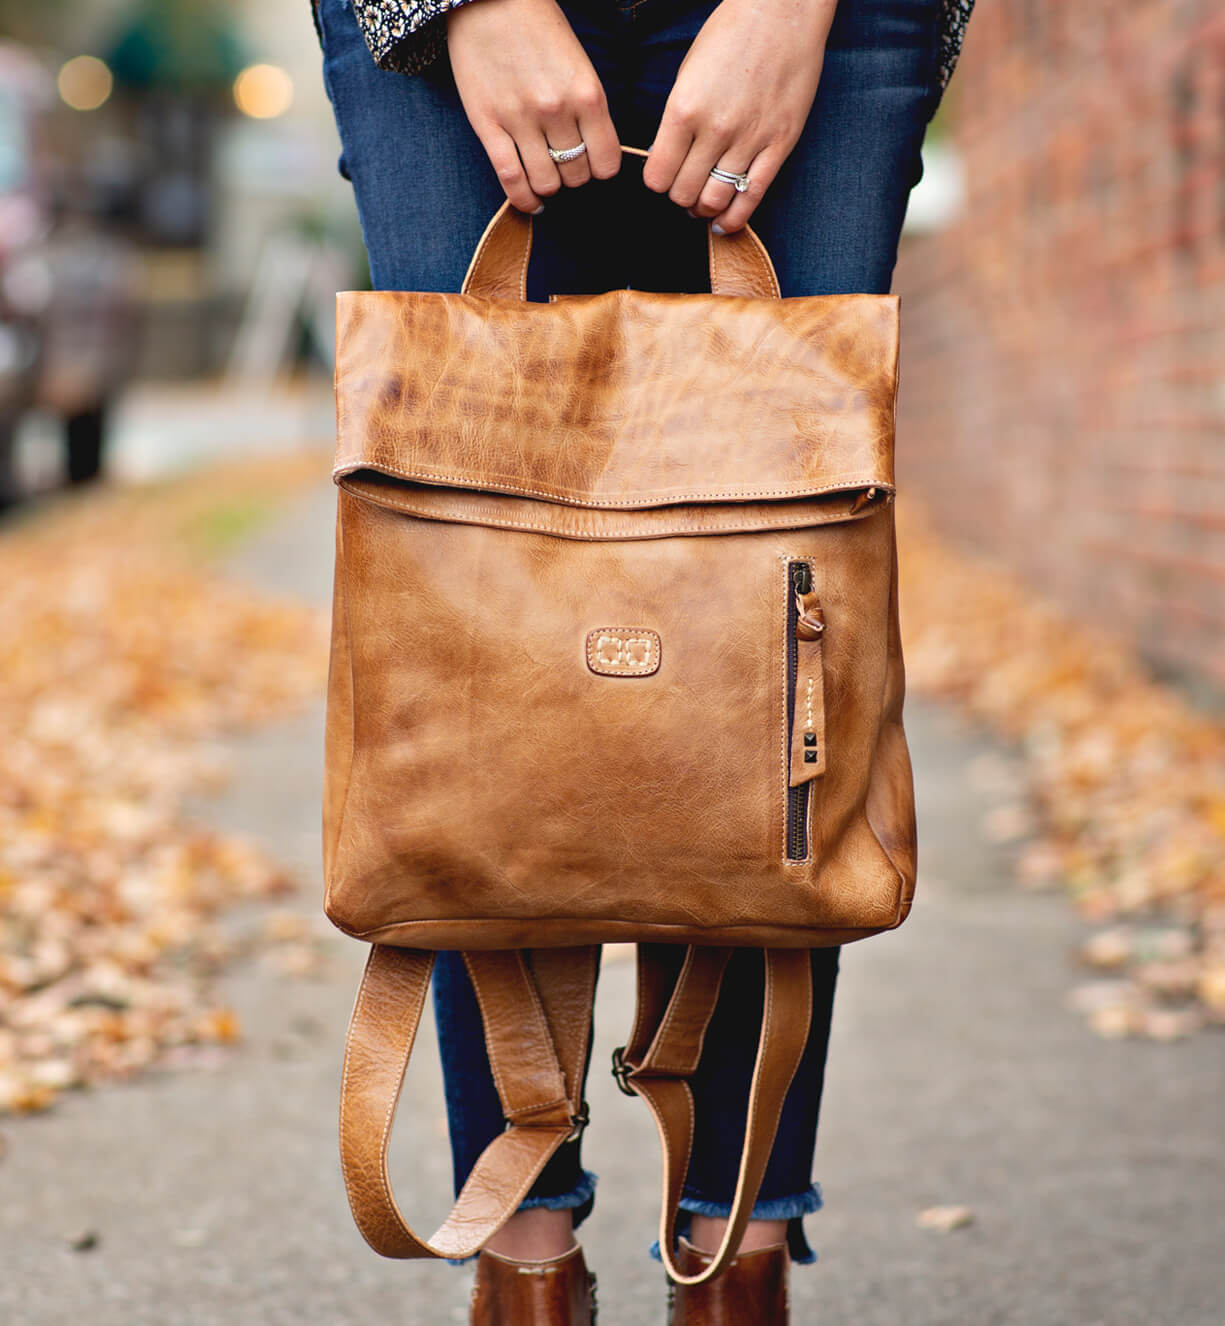 A woman holding a tan leather Bed Stu Howie backpack on a sidewalk.